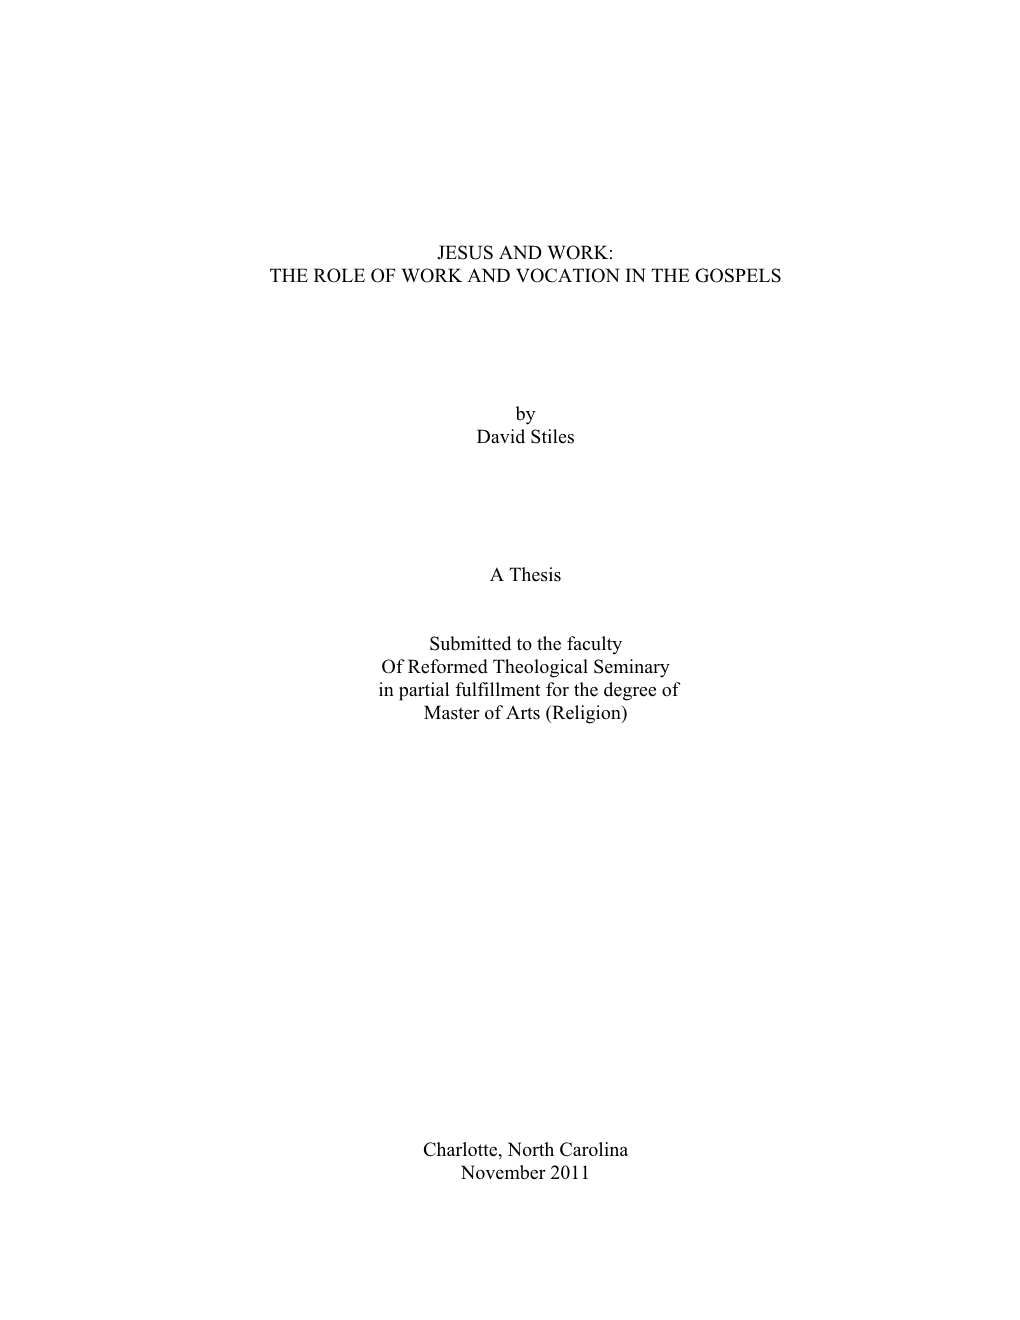 JESUS and WORK: the ROLE of WORK and VOCATION in the GOSPELS by David Stiles a Thesis Submitted to the Faculty of Reformed Theo